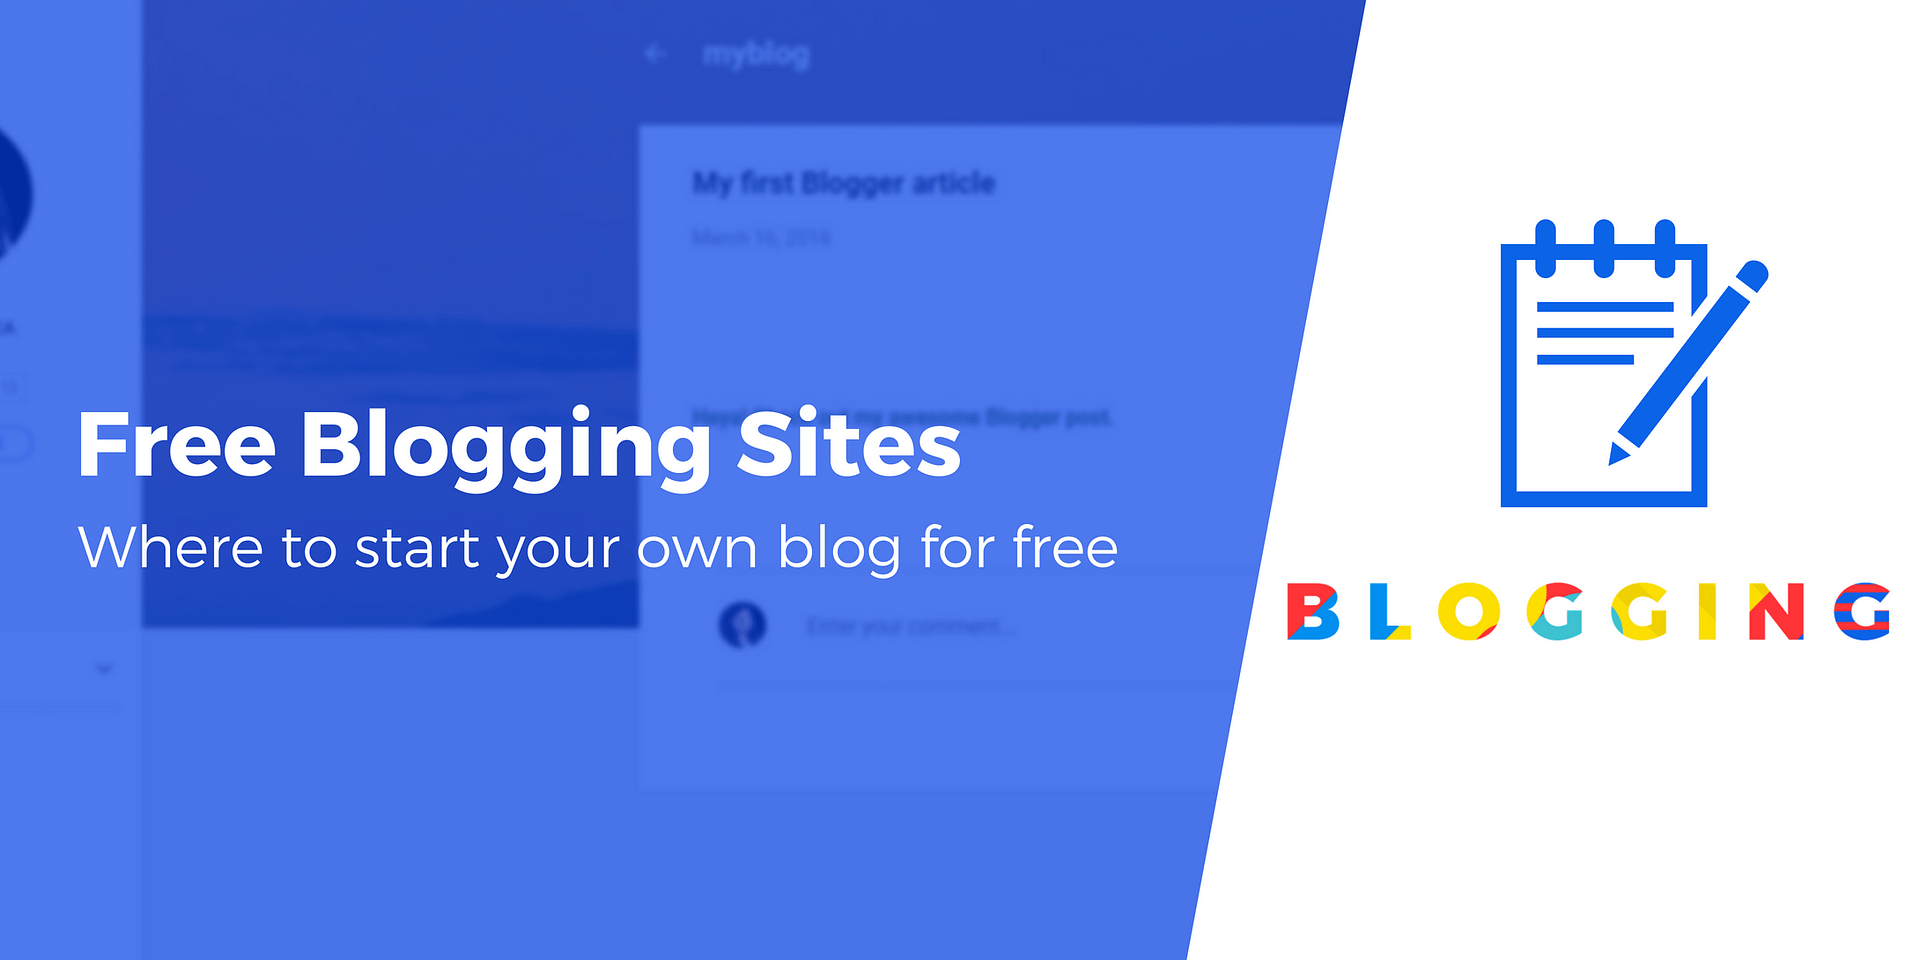 9 Best Free Blogging Sites in 2020 (Create a Blog for Free)